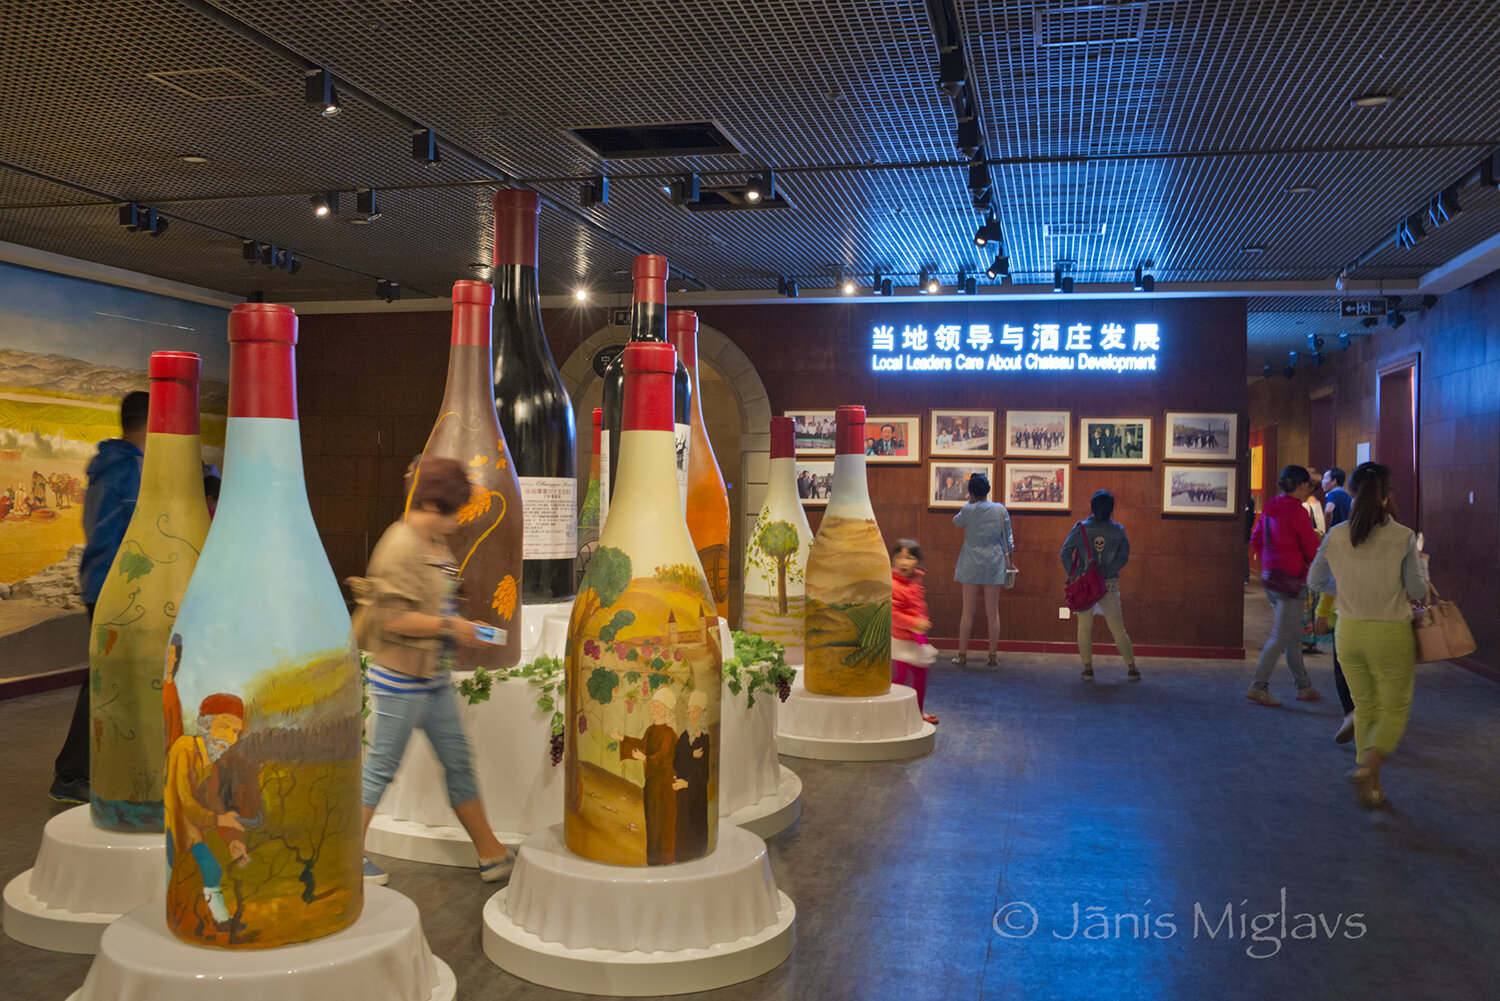 Giant hand-painted wine bottles in visitors' display at Changyu Moser XV winery.